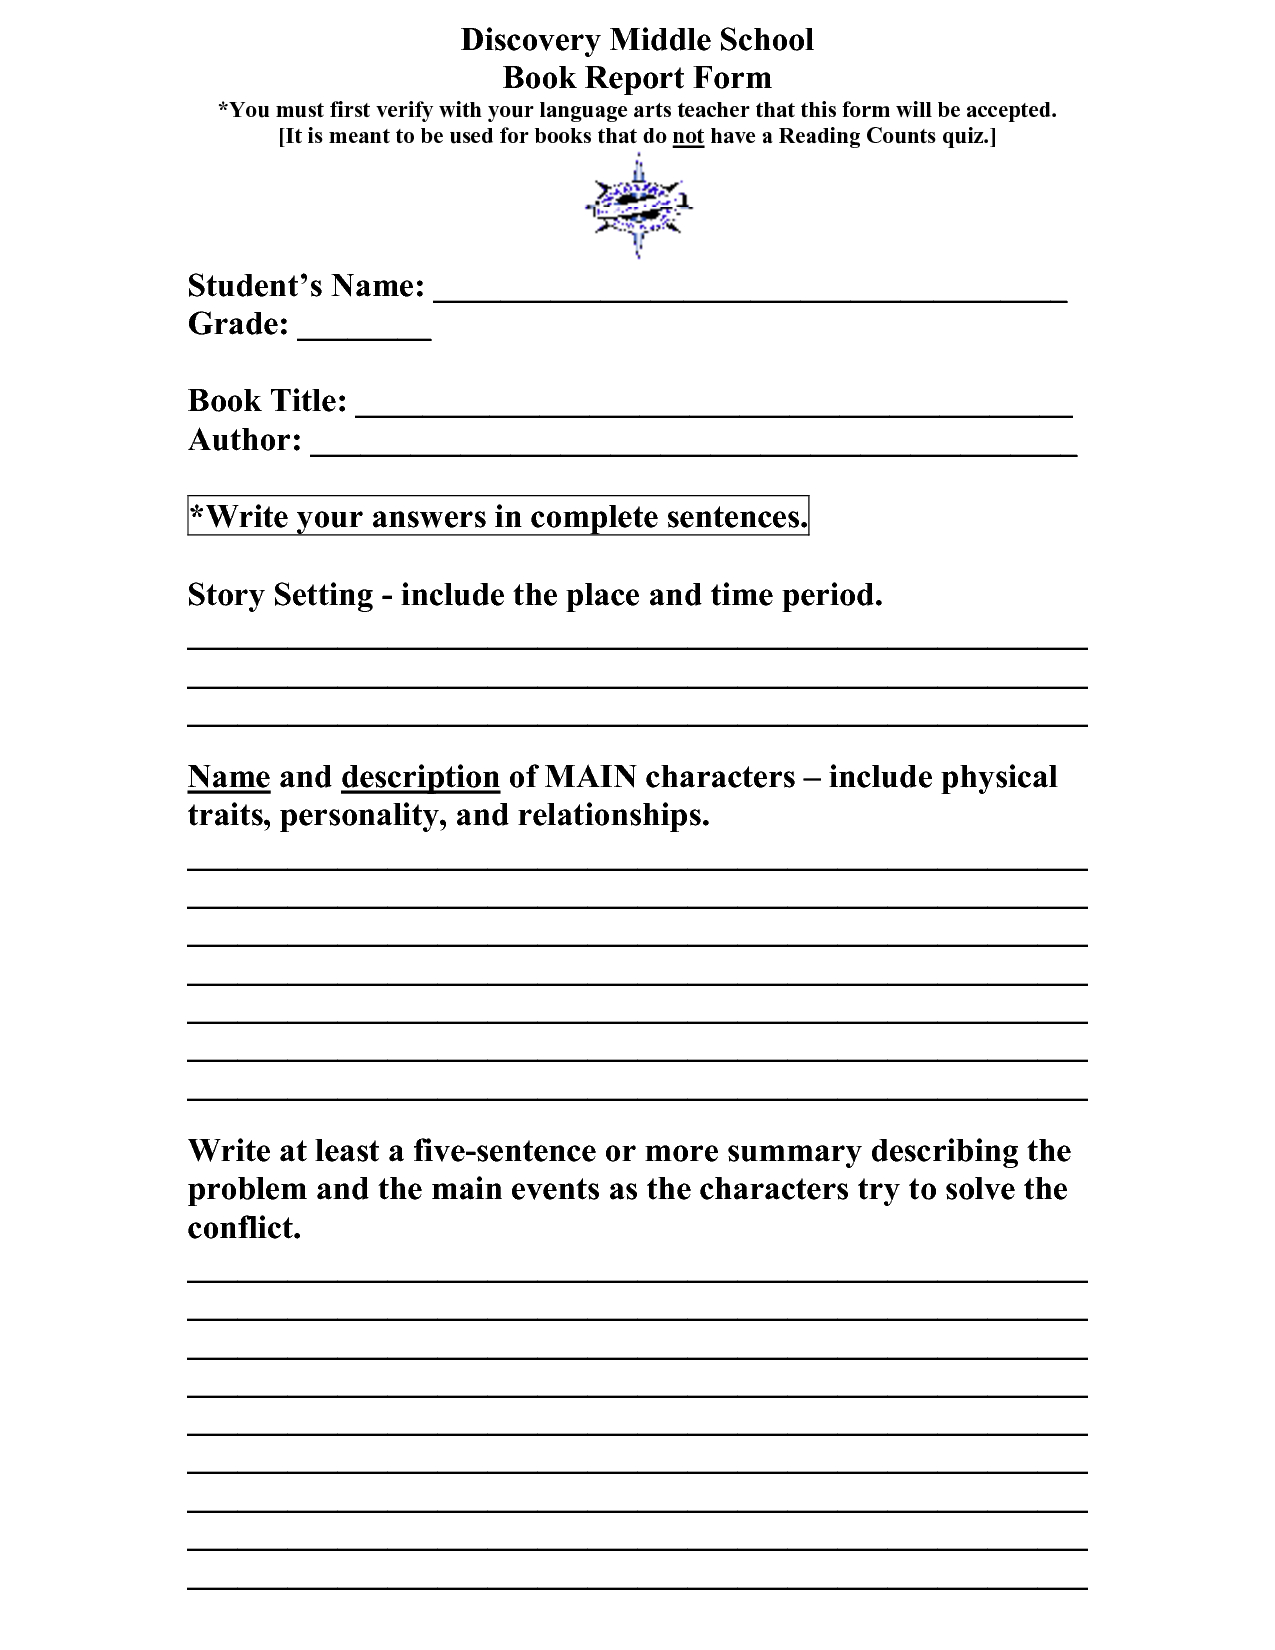 free-printable-book-report-forms-for-elementary-students-free-printable-a-to-z